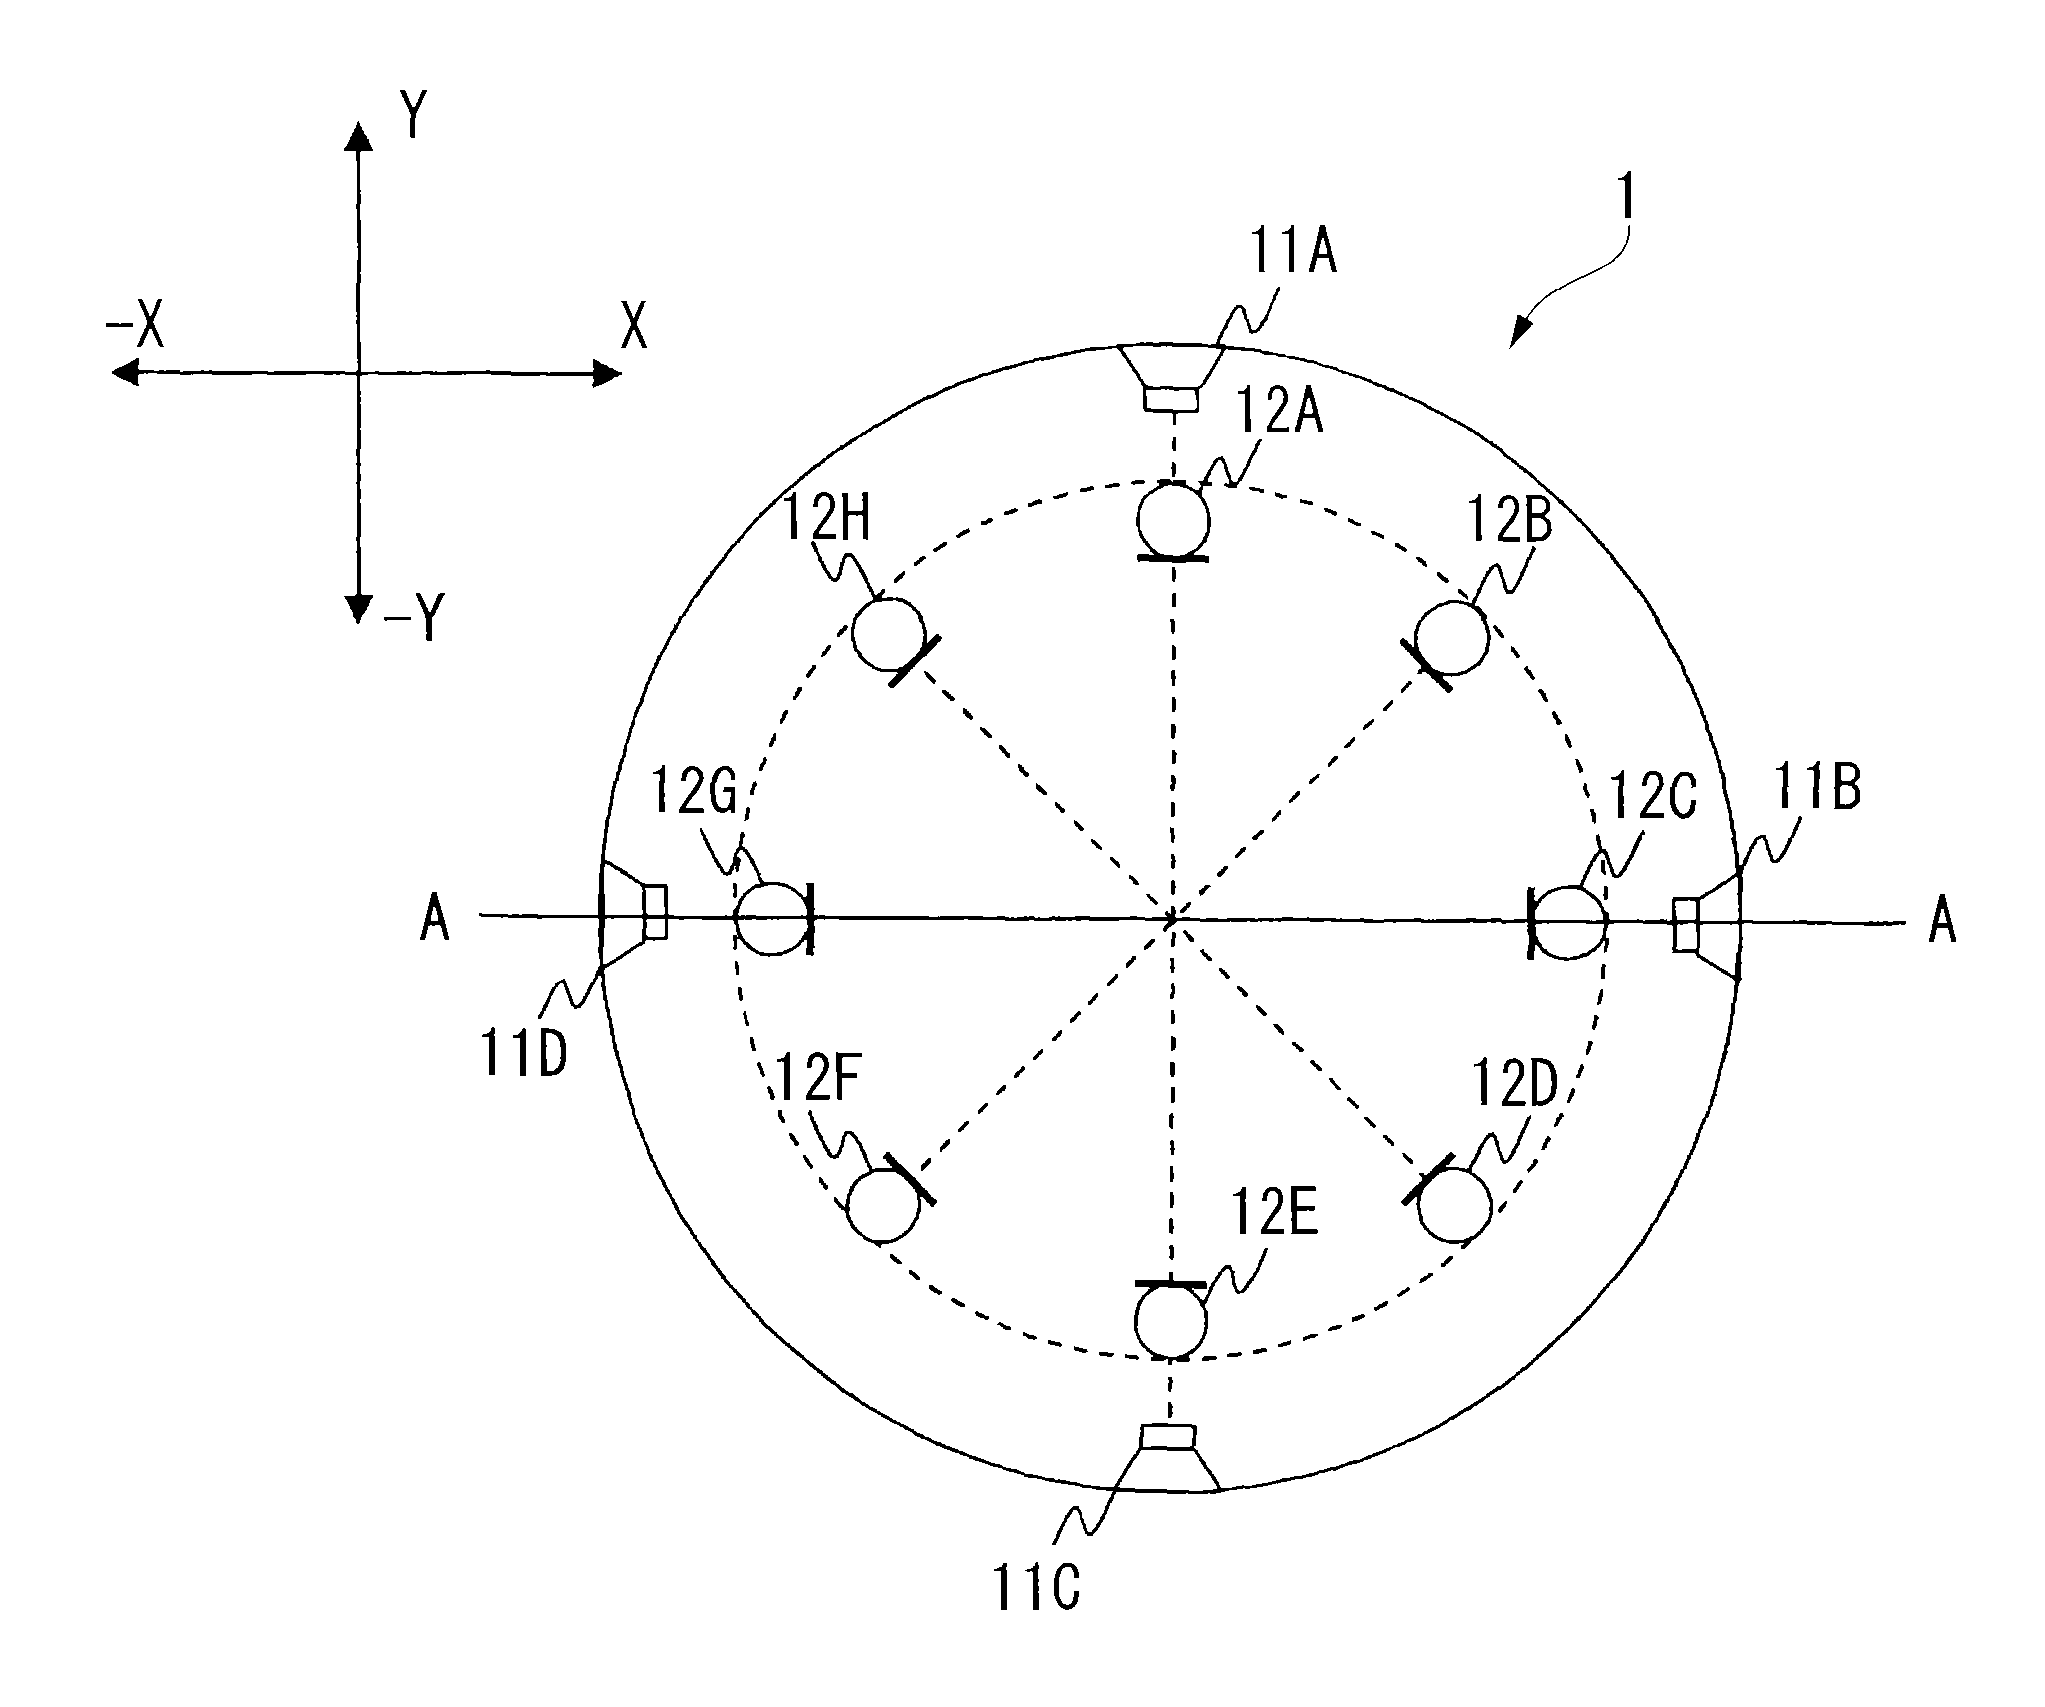 Sound emission and collection device